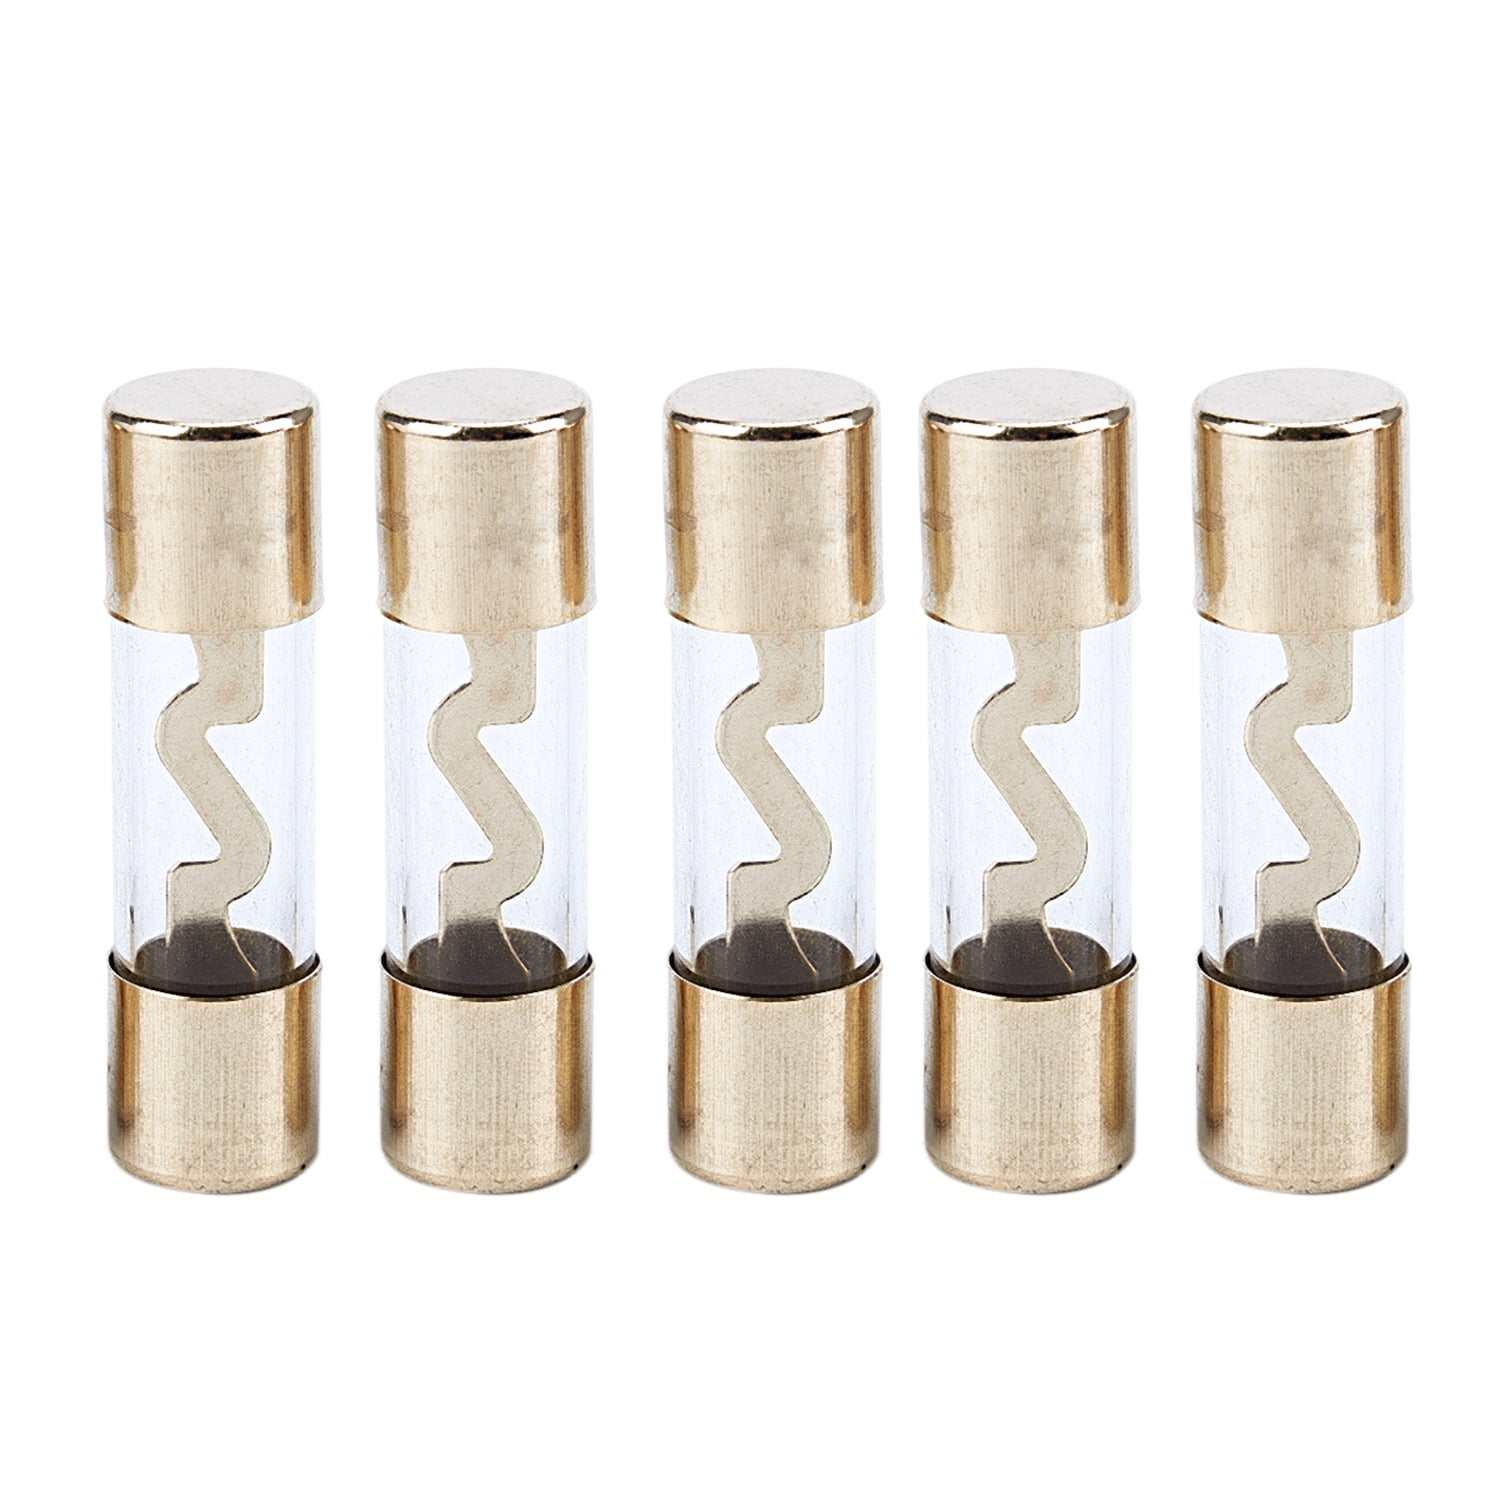 5 New AGU Fuses Reliable Gold Plated Pack of 40 Amp 40A 